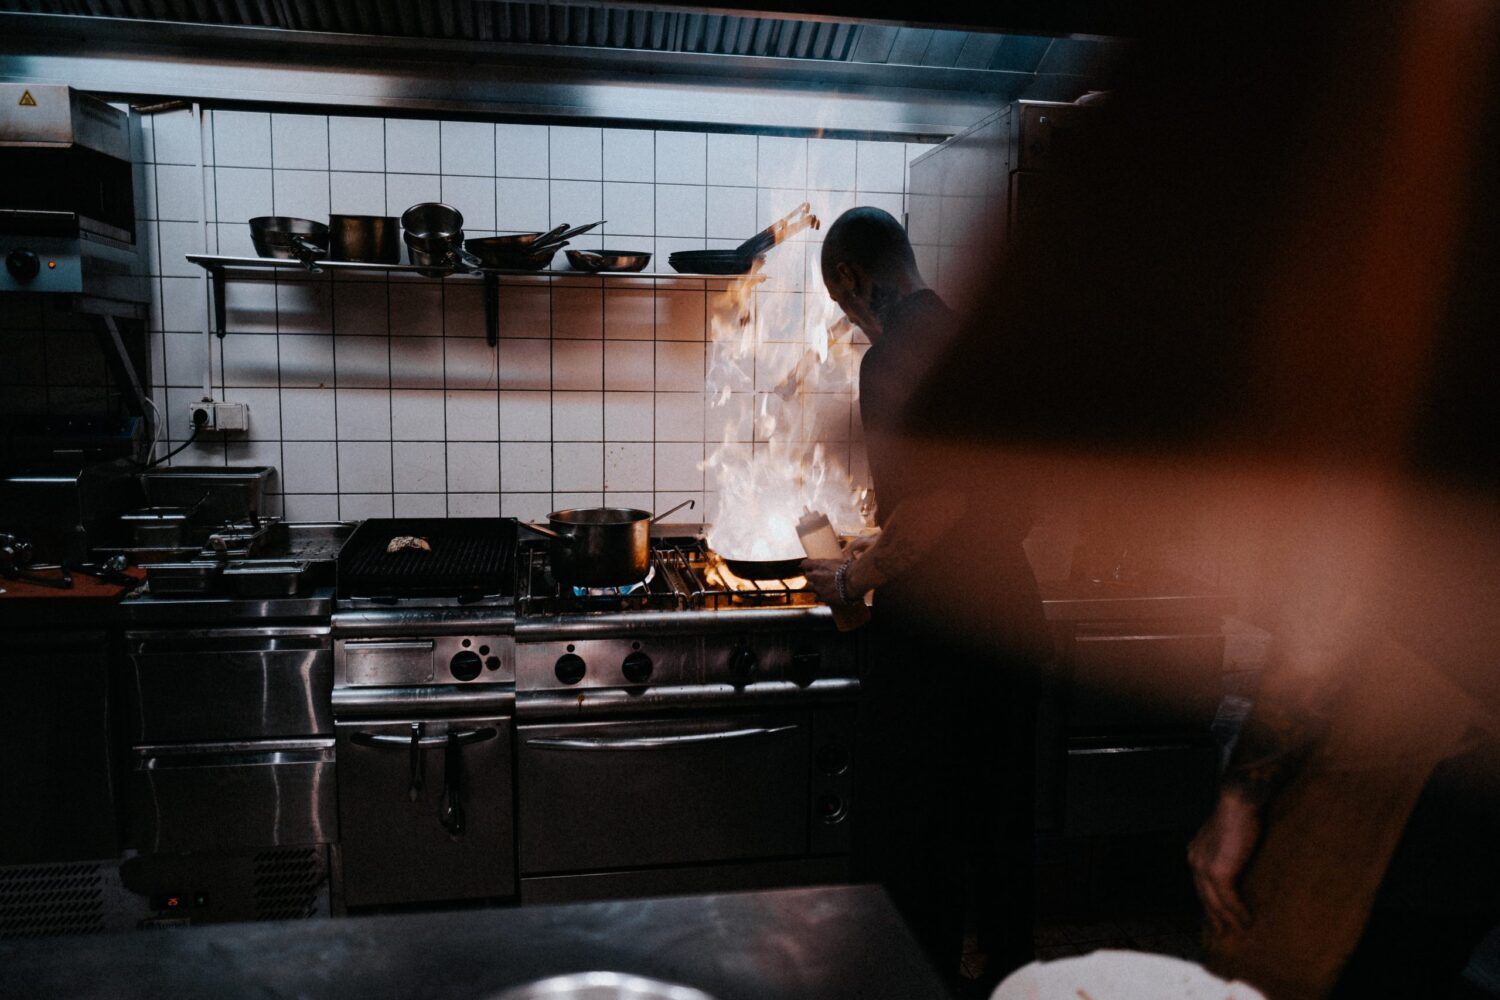 A dark image of man standing at grill, large flame coming from stovetop pan